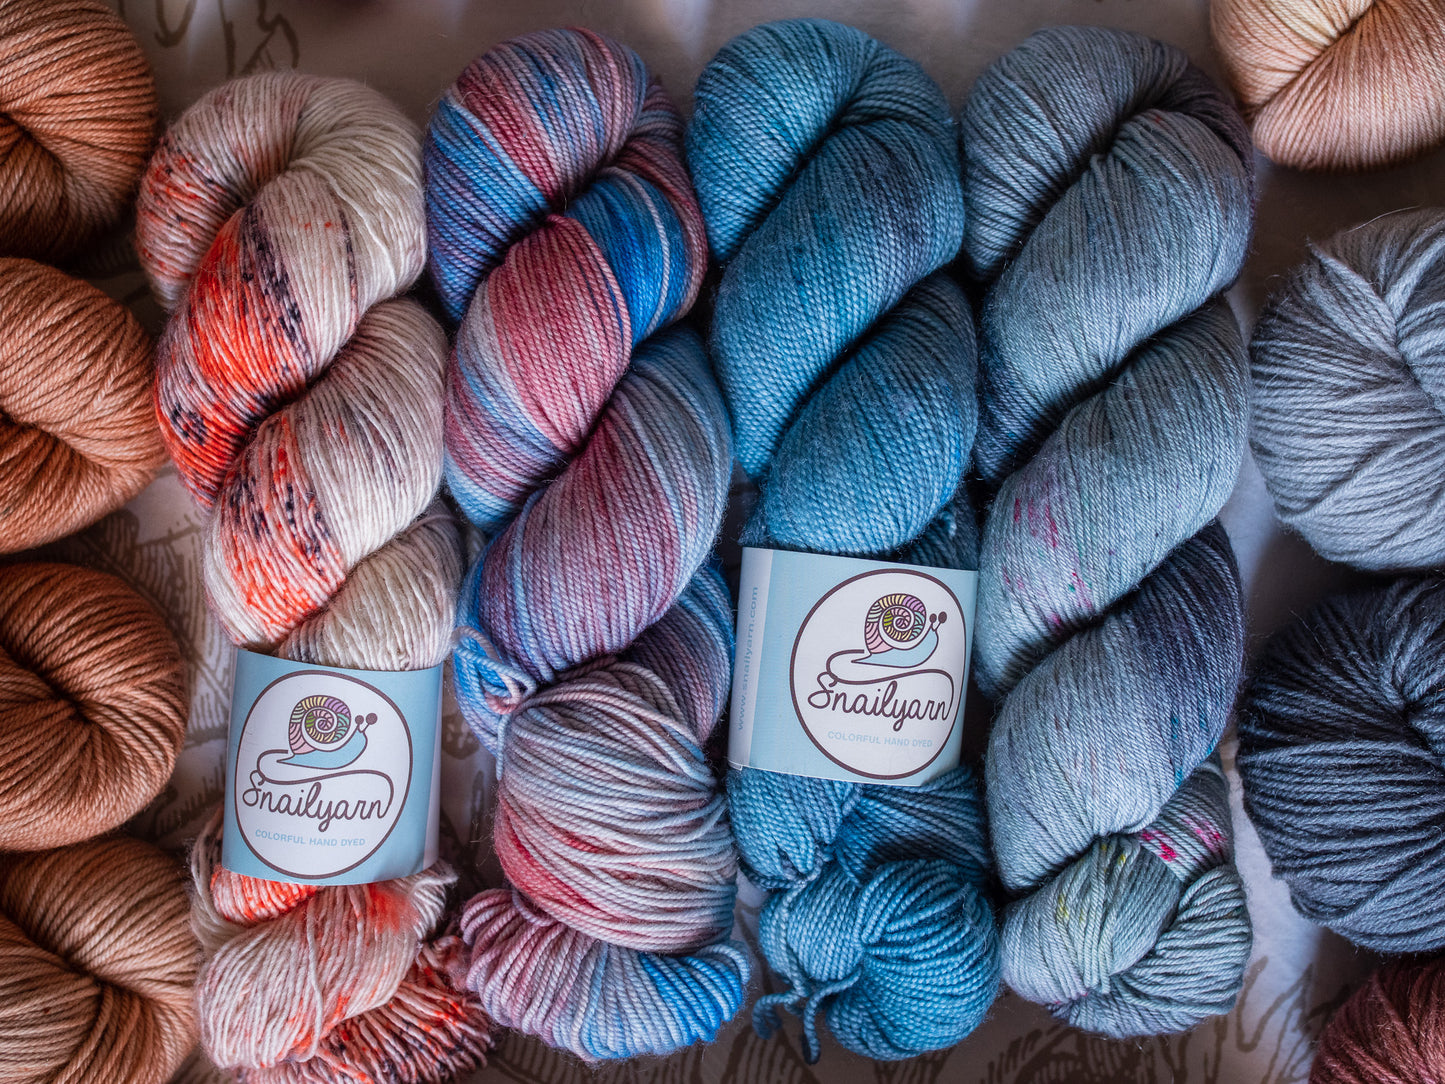 Shawl/Sweater Fade Bundle 24 - Pink/light Blue lover - Fingering weight - 1465 Meters